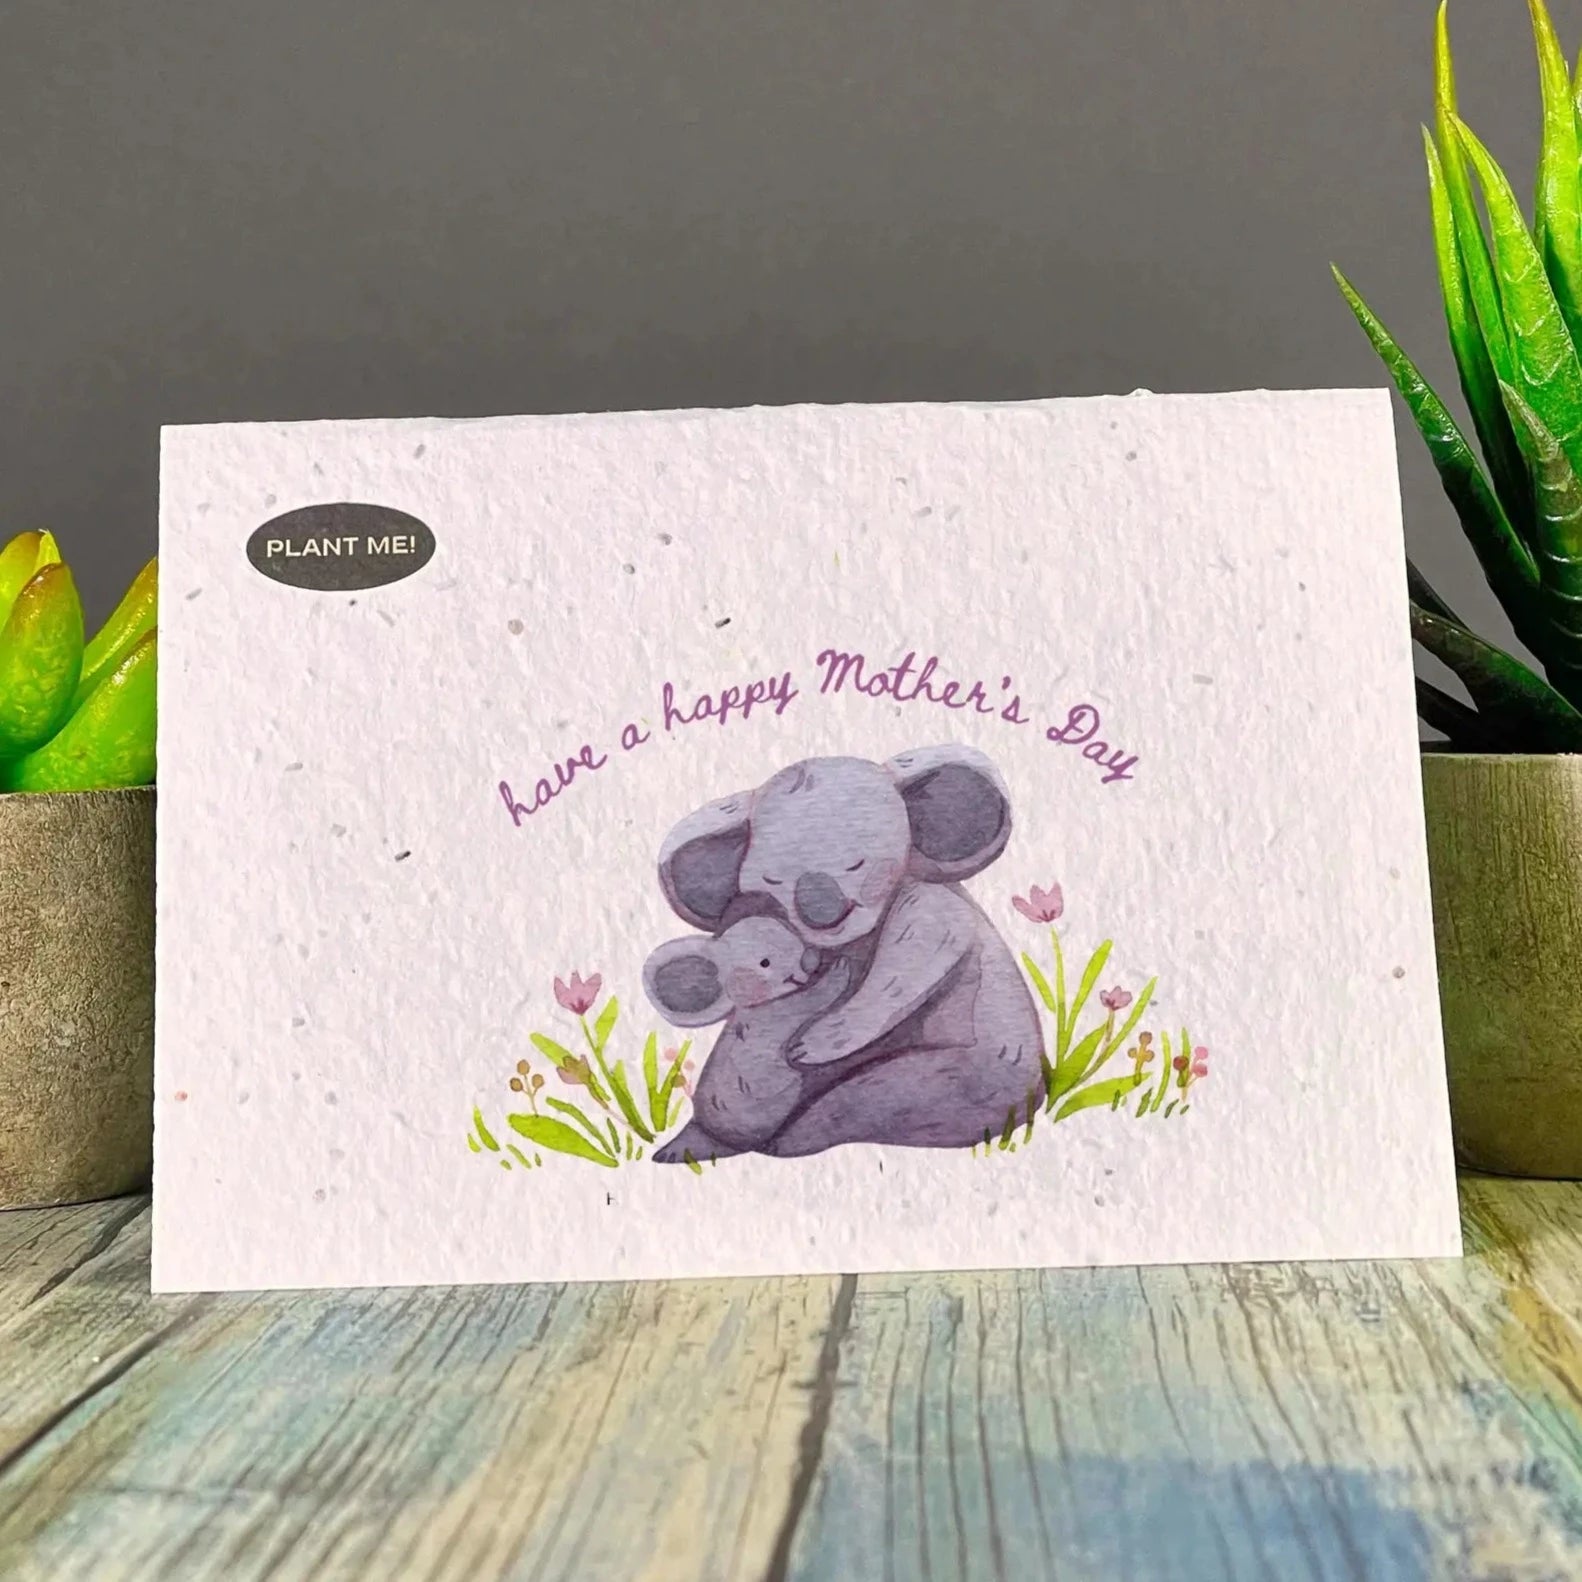 Plantable Greetings Cards - Mom Living Plantable Greetings Koalas Have a Happy Mother’s Day Prettycleanshop